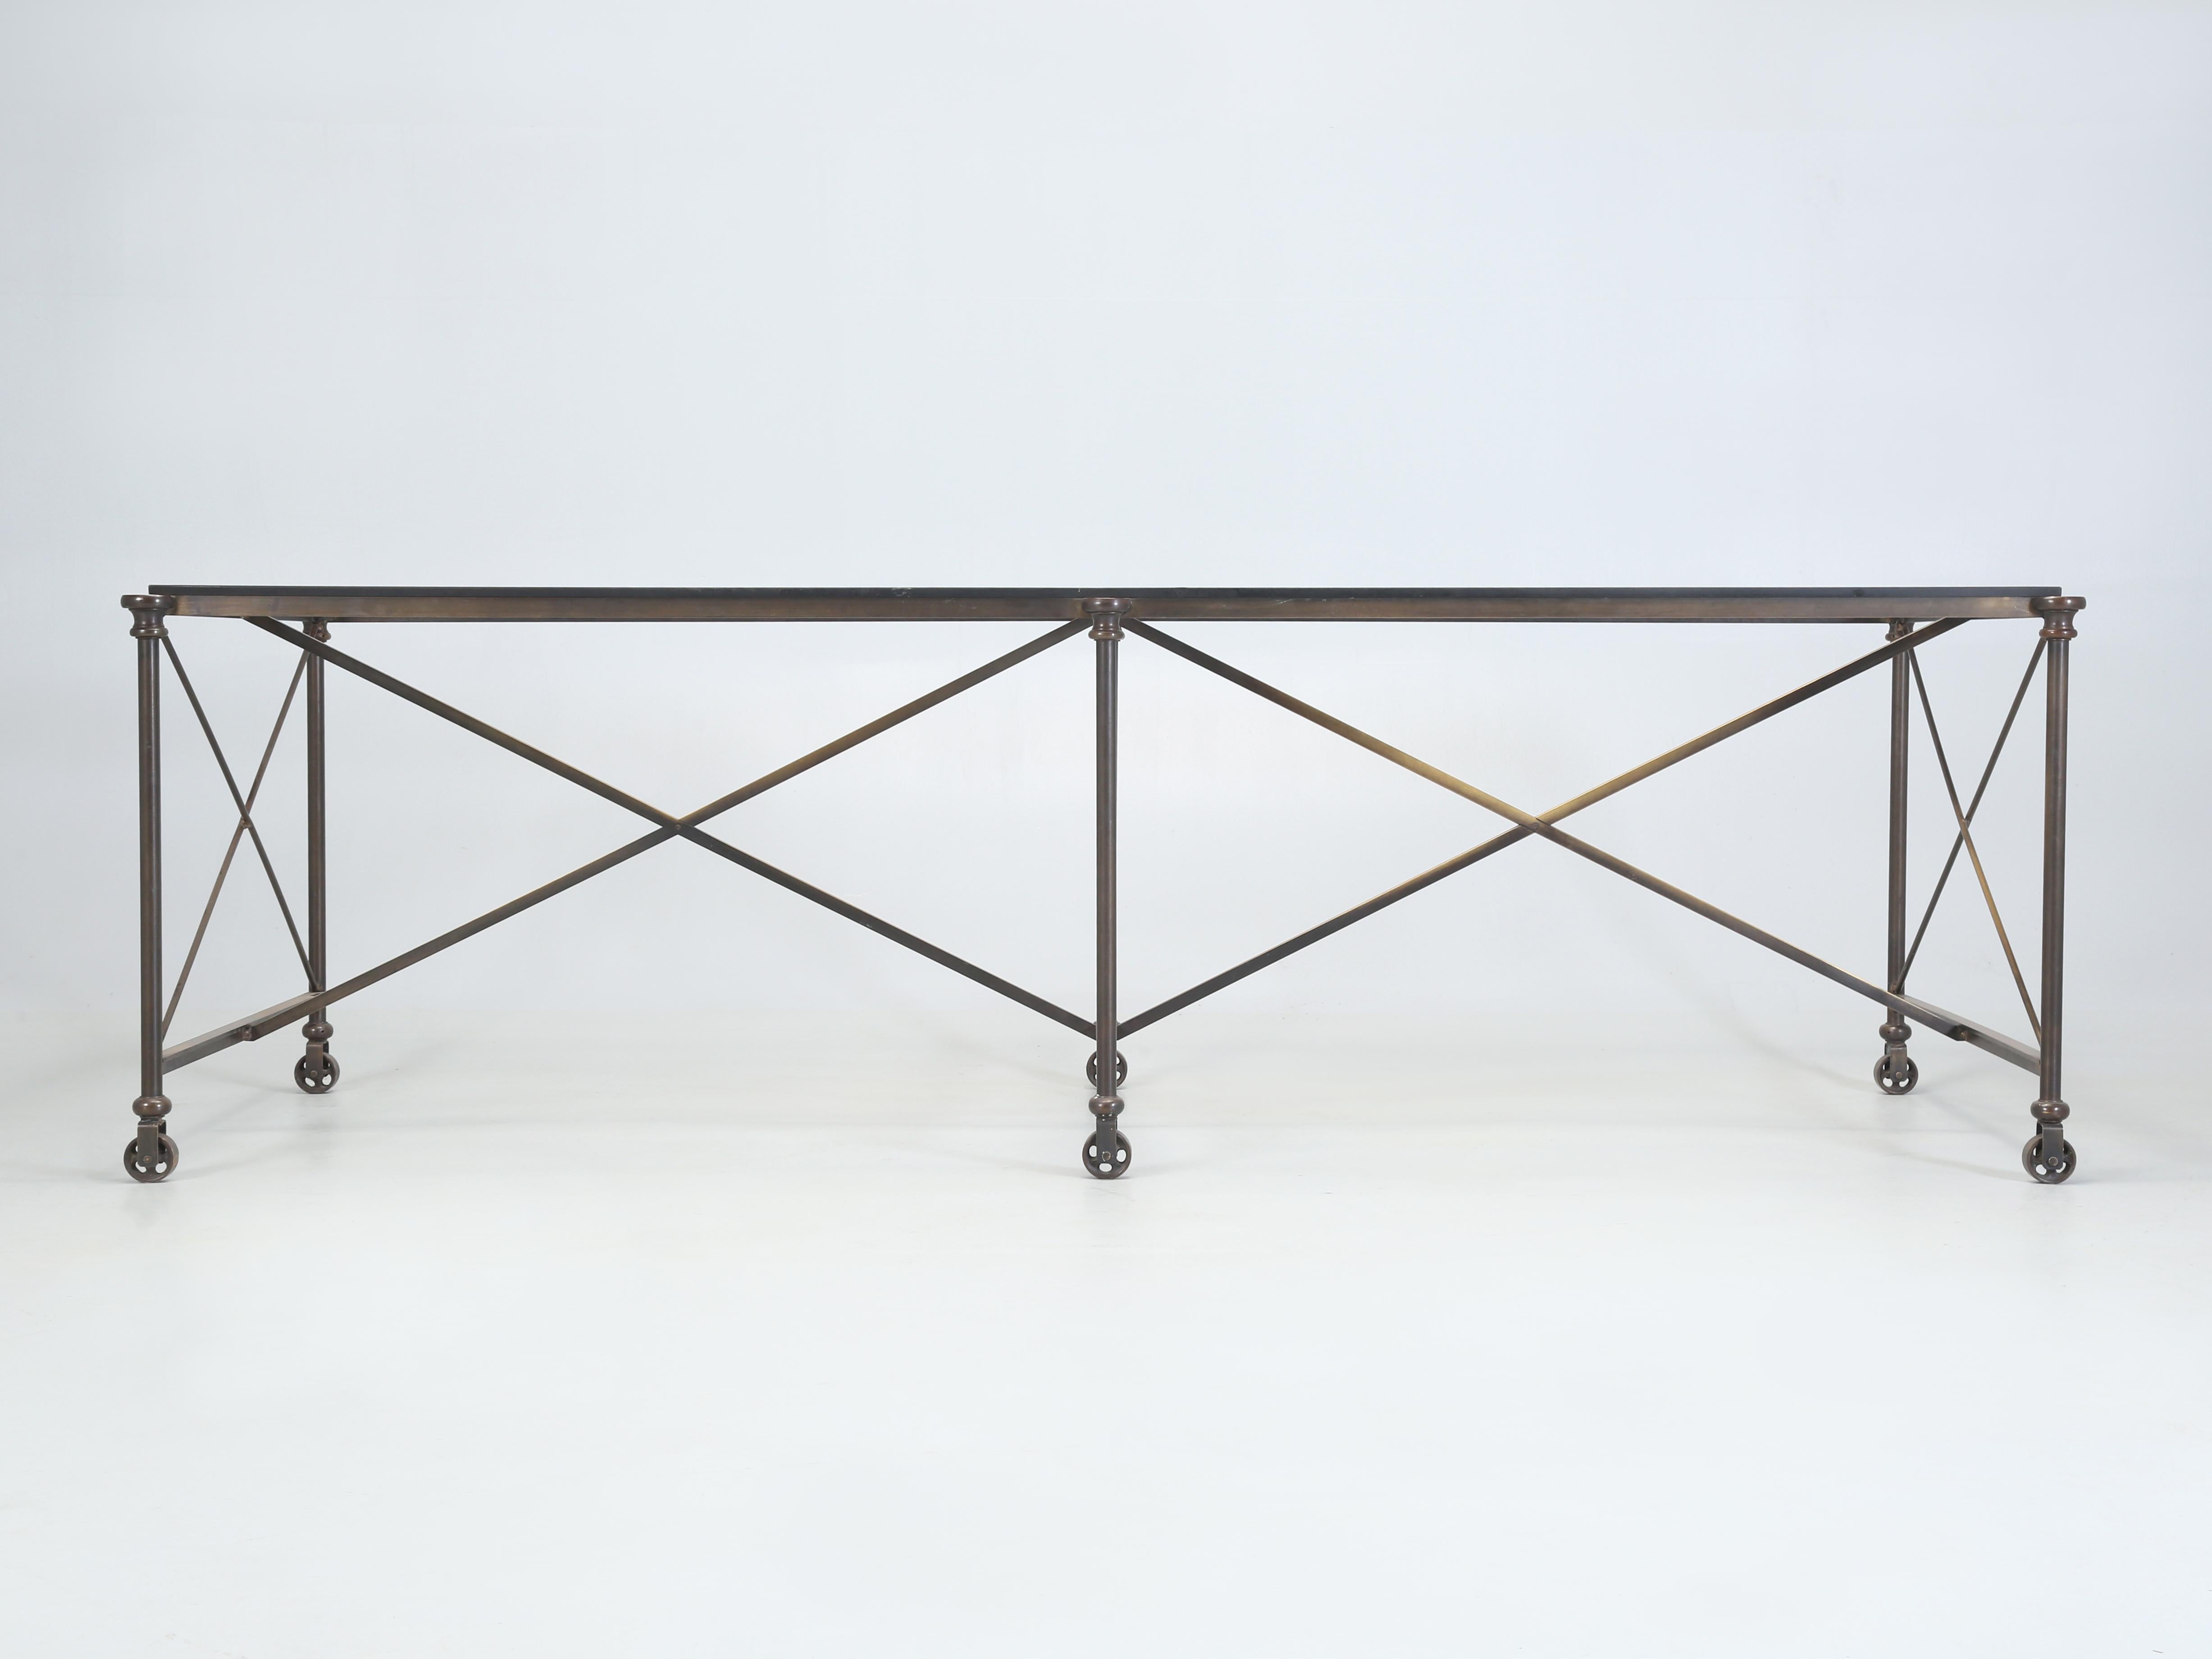 Custom made by the Old Plank Collection of French Inspired Kitchen Islands and Kitchen Tables is this Solid Bronze Industrial Style Kitchen Table Frame ready for the top of your choosing. This particular Old Plank Bronze Table Frame has been a